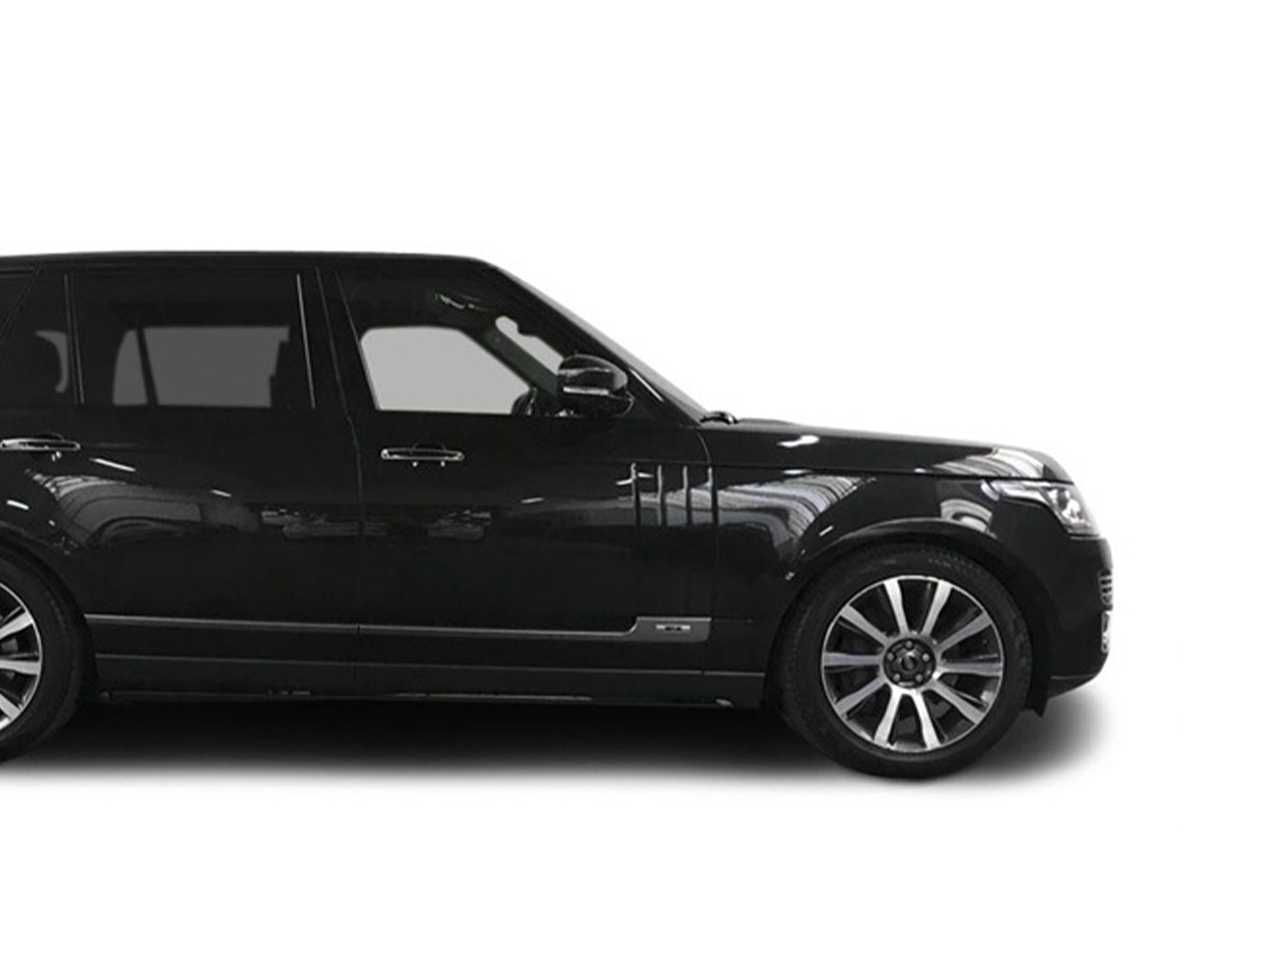 Range Rover Vogue 5L LWB car for hire in London by Hertz Dream Collection